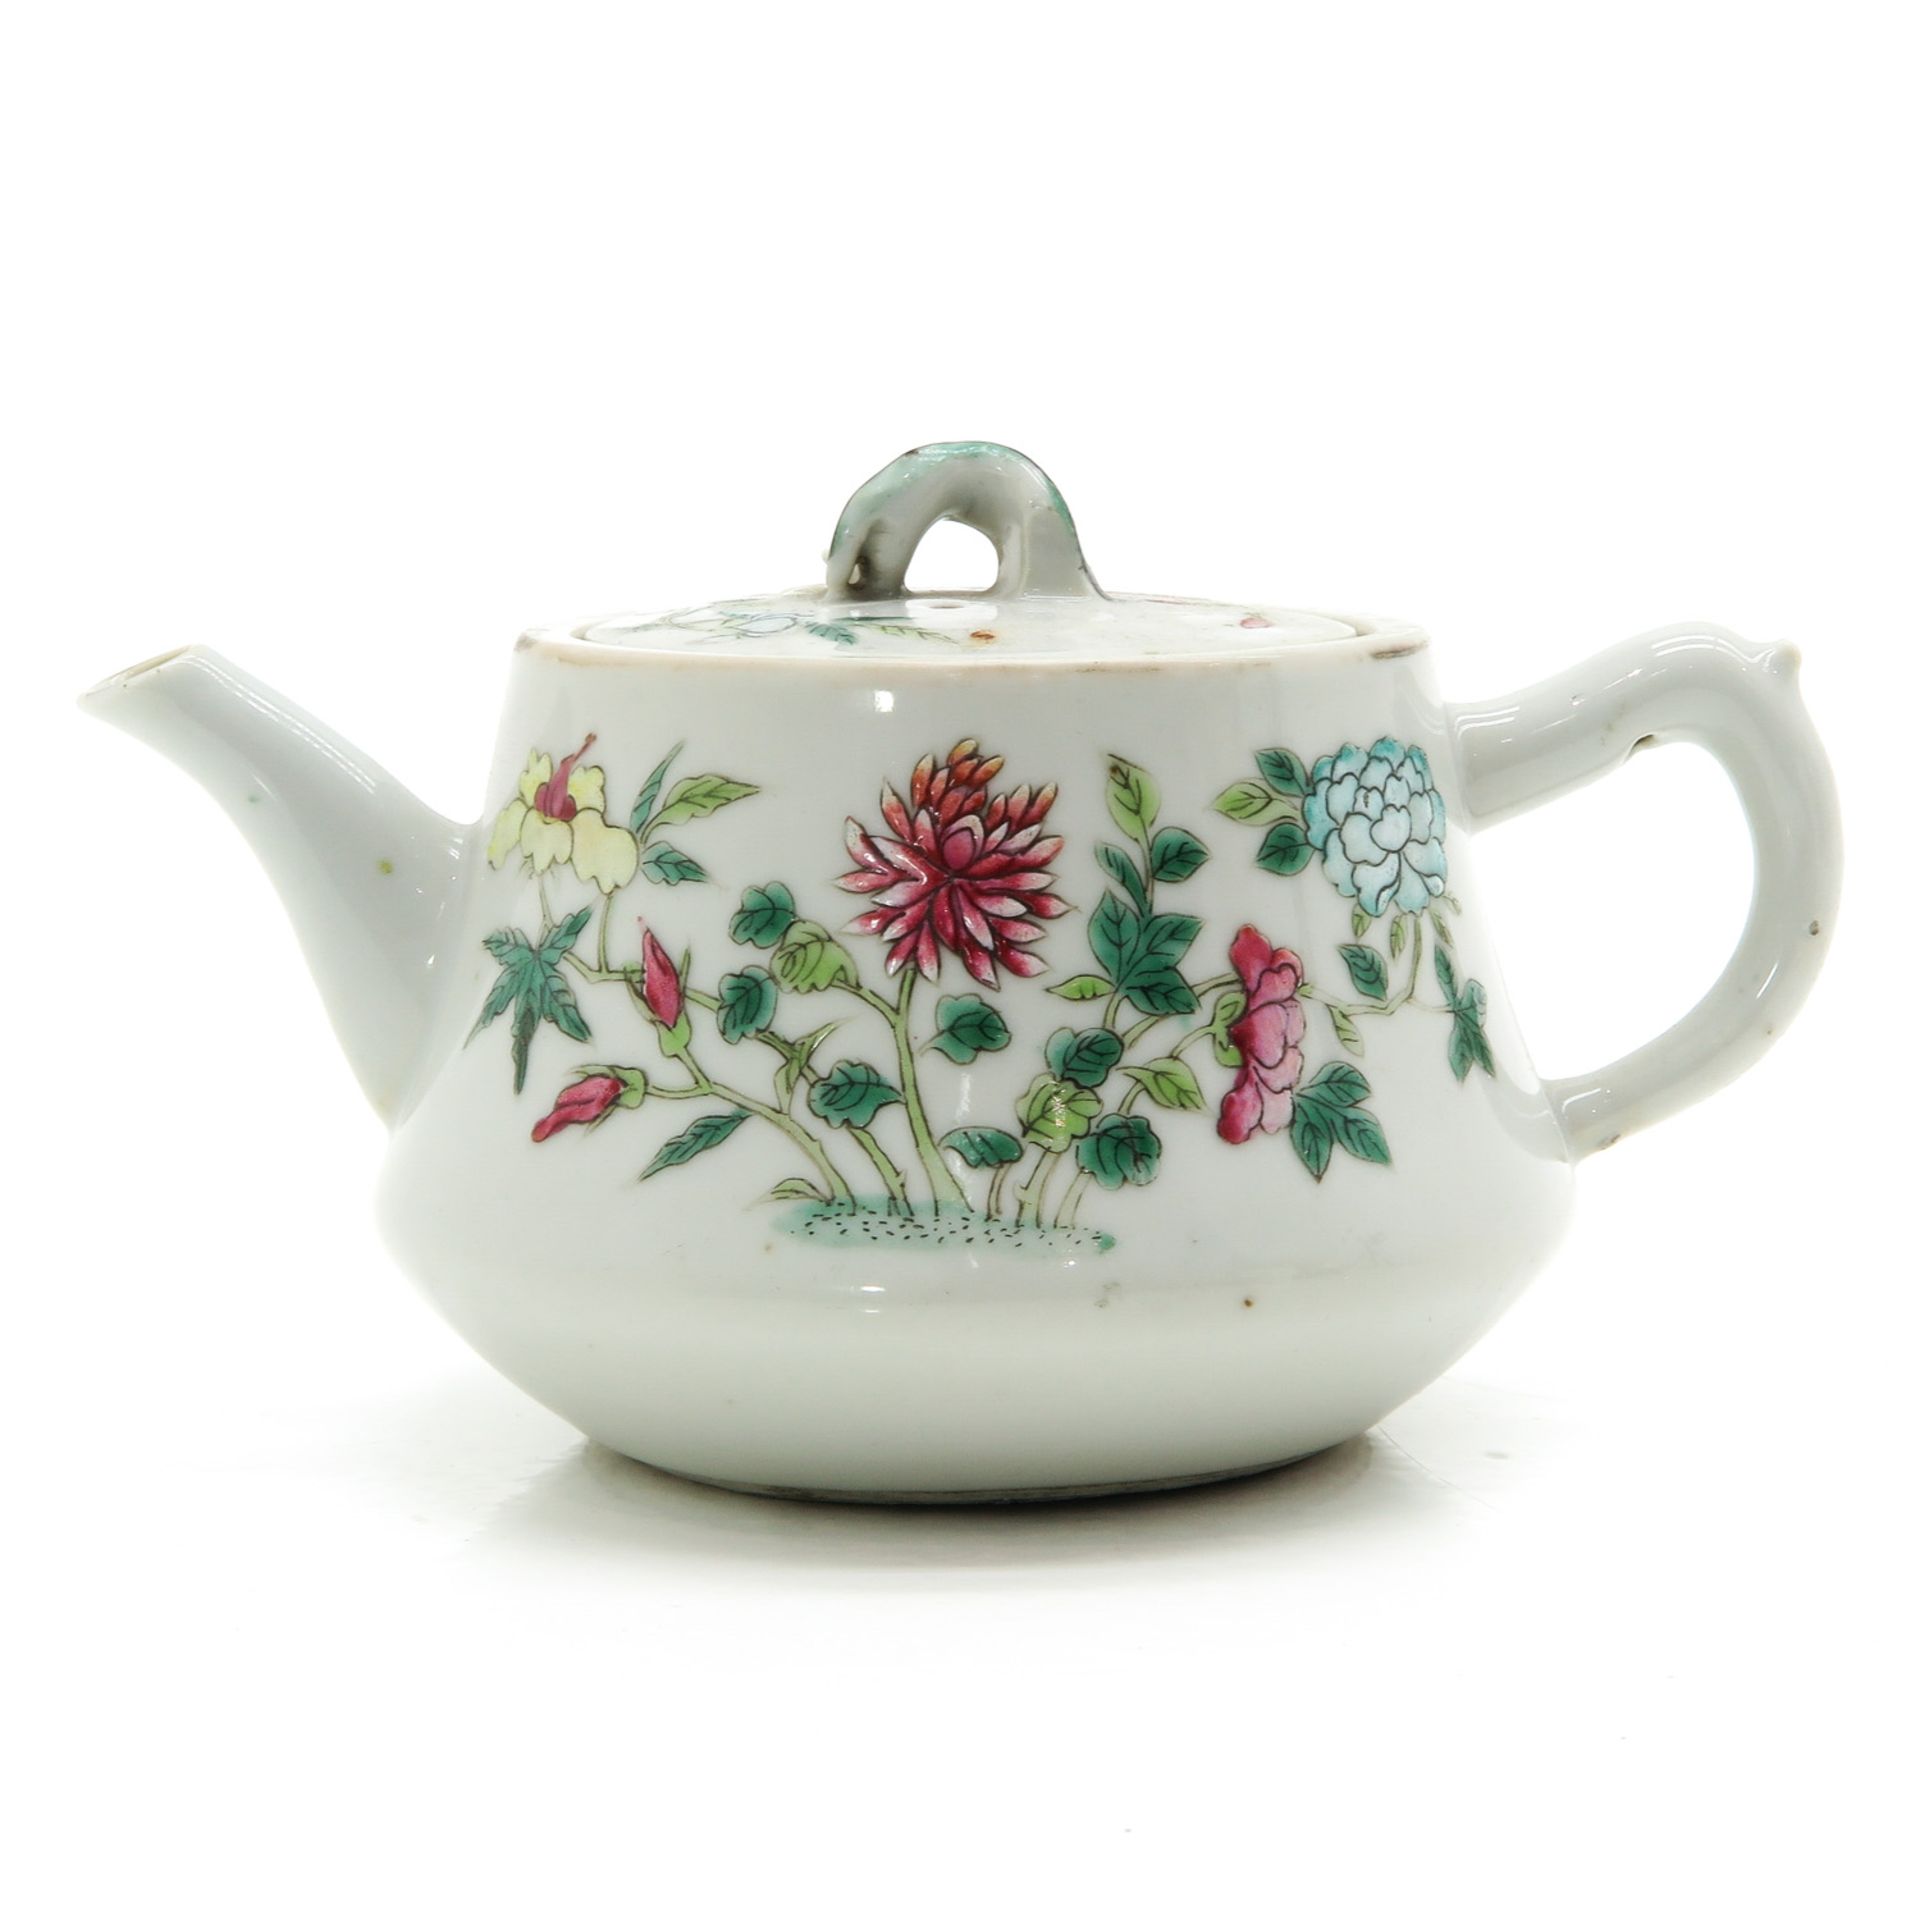 A Famille Rose Teapot